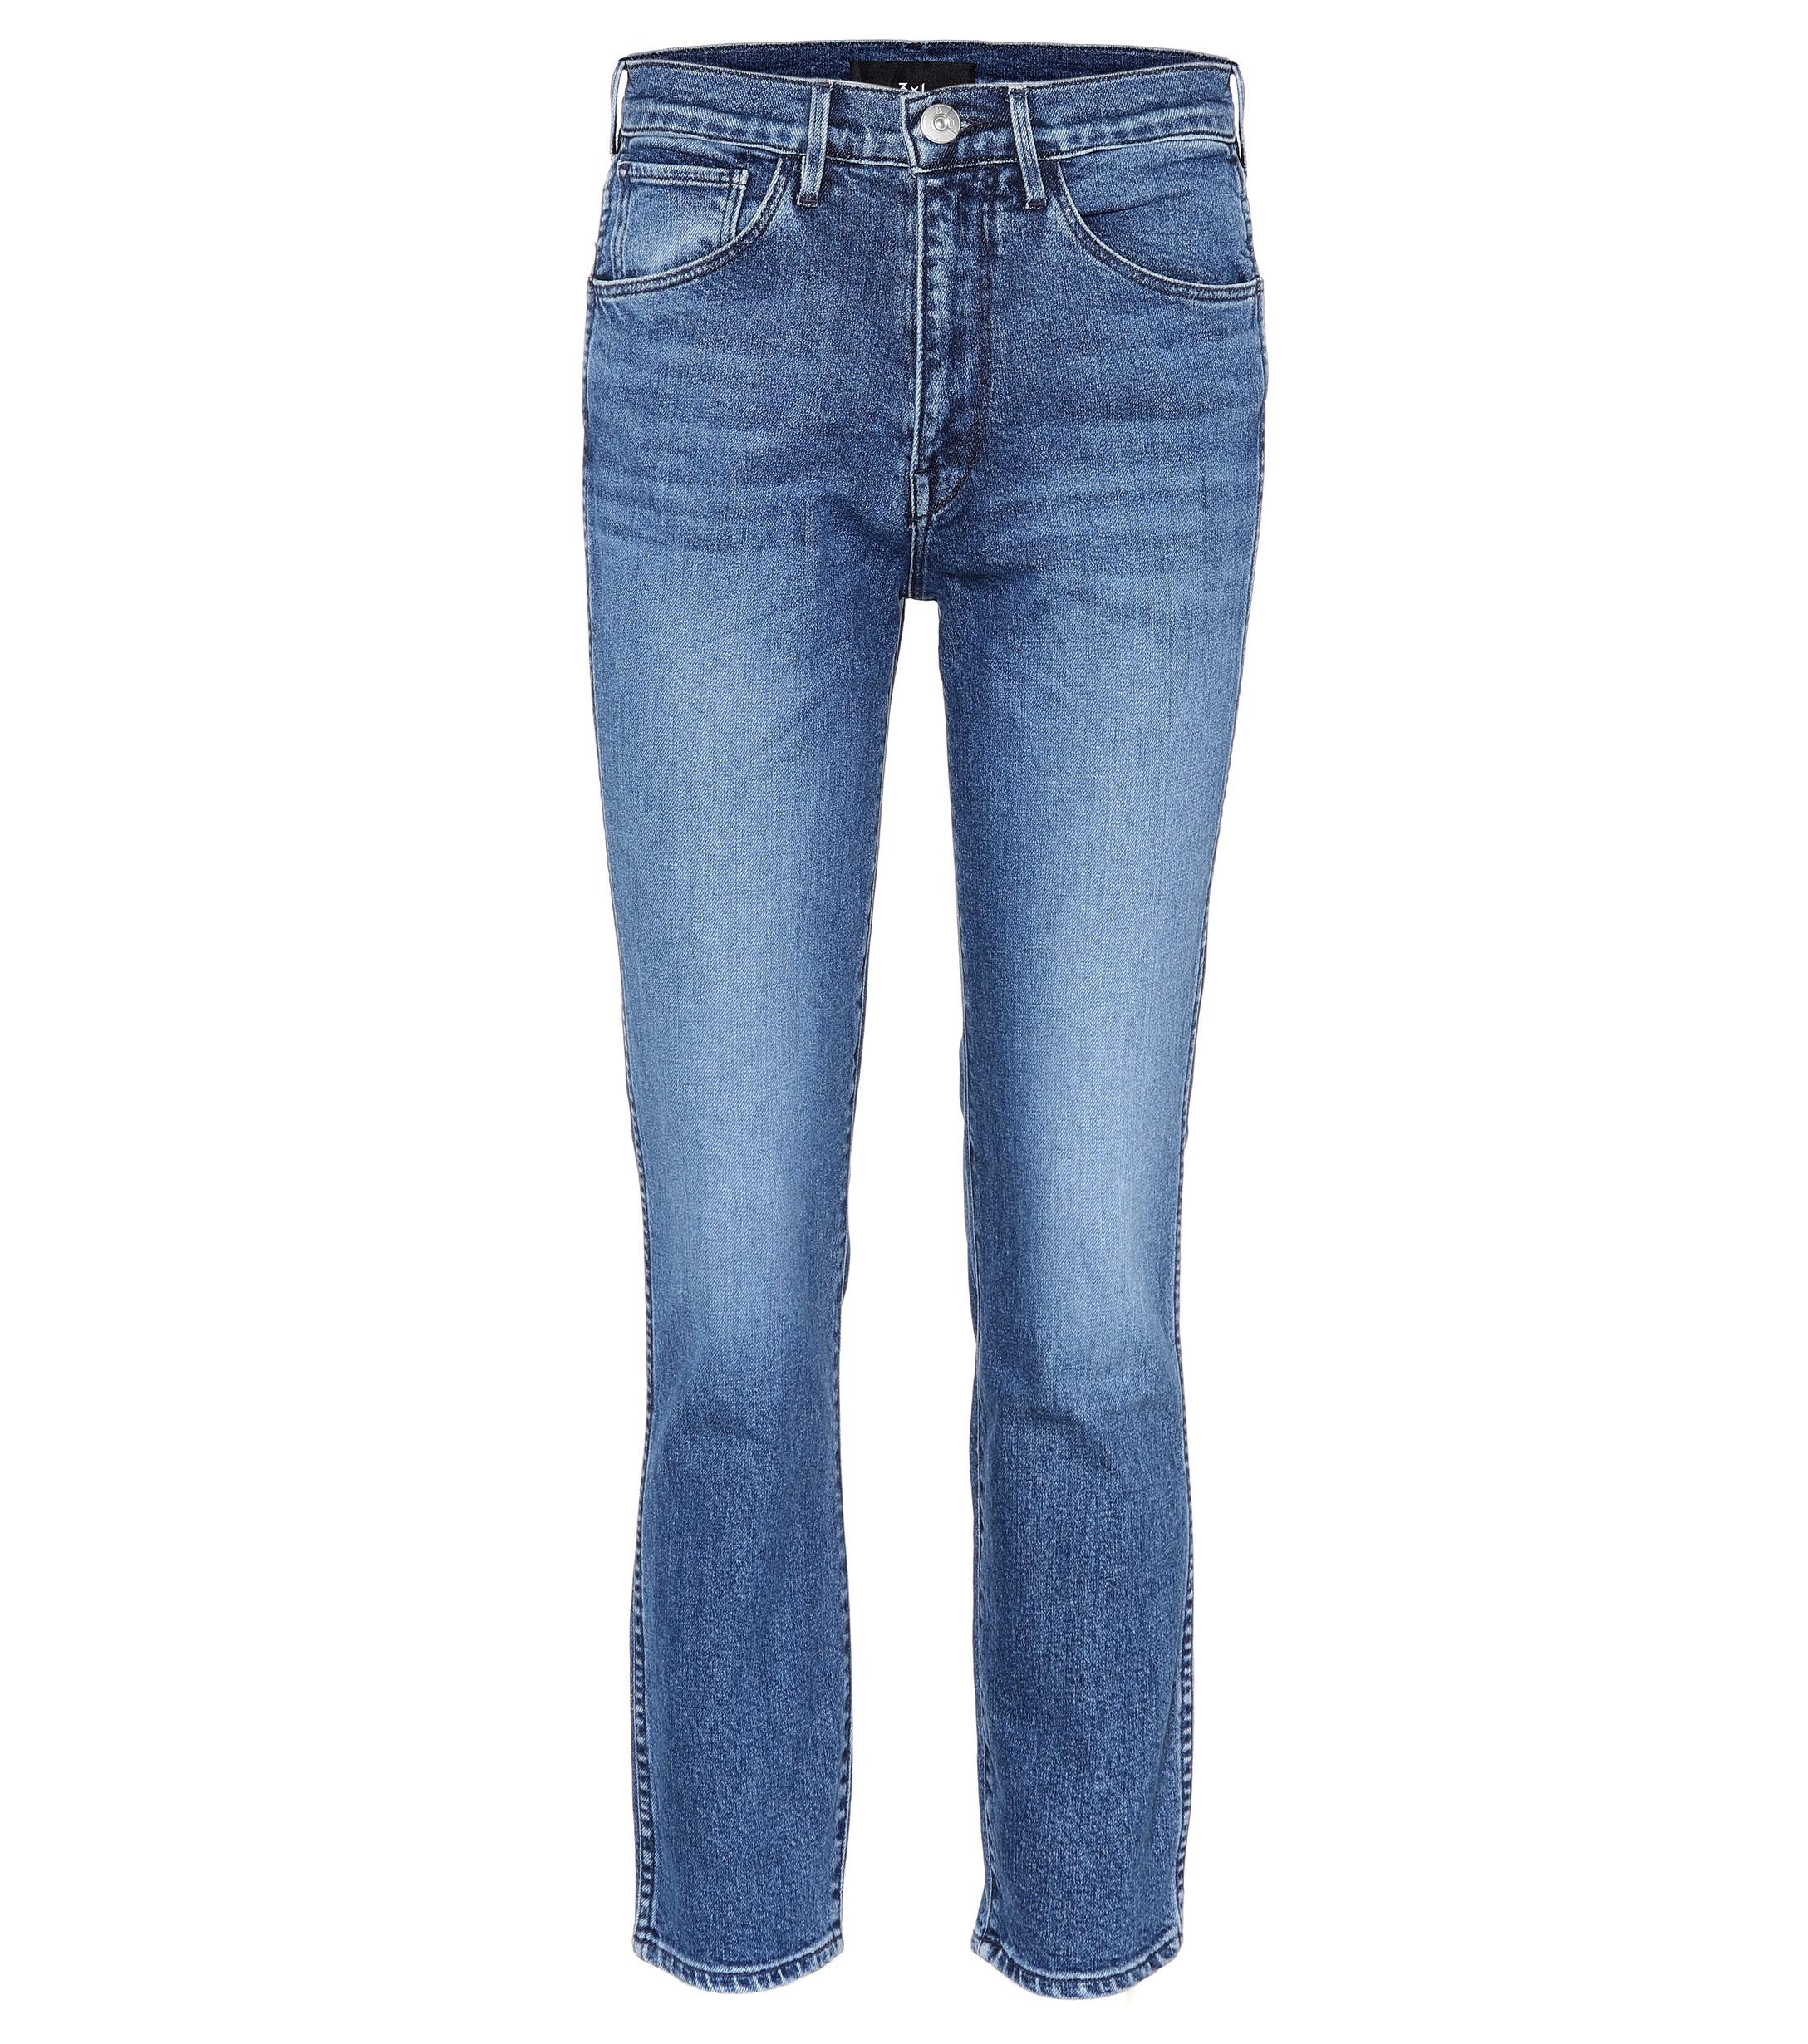 Lyst - 3X1 W3 Authentic Straight Jeans in Blue